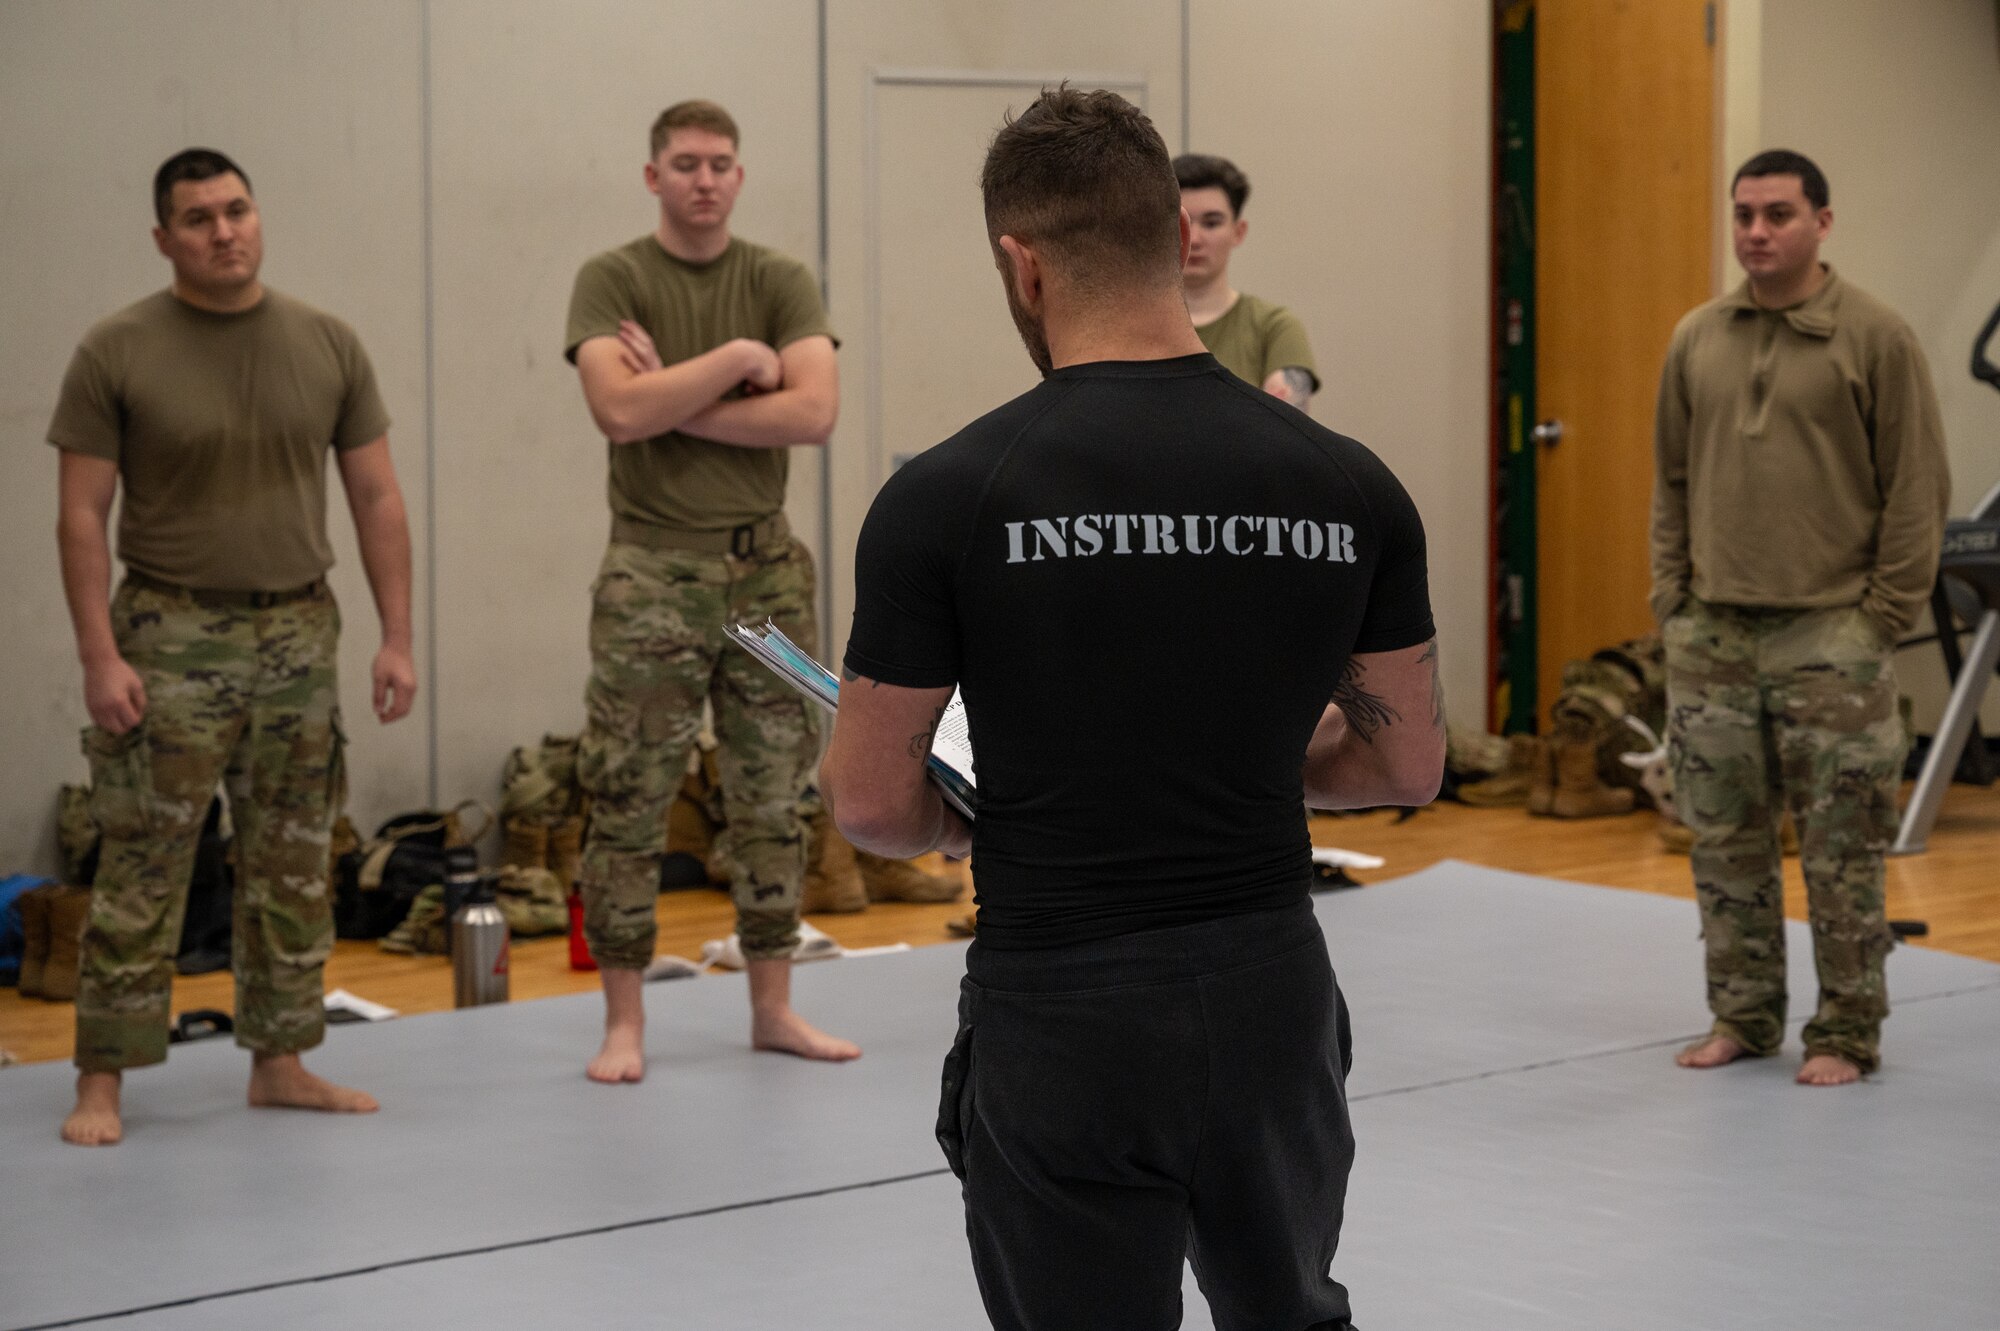 U.S. Air Force Staff Sgt. Kyle Virgillio, 5th Combat Communications Support Squadron master combatives instructor, reviews course material with Airmen from the 621st Air Control Squadron during a combatives instructor certification course at Osan Air Base, Republic of Korea, Feb. 23, 2024. Airmen benefit in many ways from learning combative techniques such as being able to defend themselves and maintaining their physical fitness. The 621st ACS and 607th Air Operations Center intend to utilize the new certifications to tailor a combatives program to their operational needs and enhance their ability to support the 51st Fighter Wing’s combat lethality. (U.S. Air Force photo by Airman 1st Class Chase Verzaal)